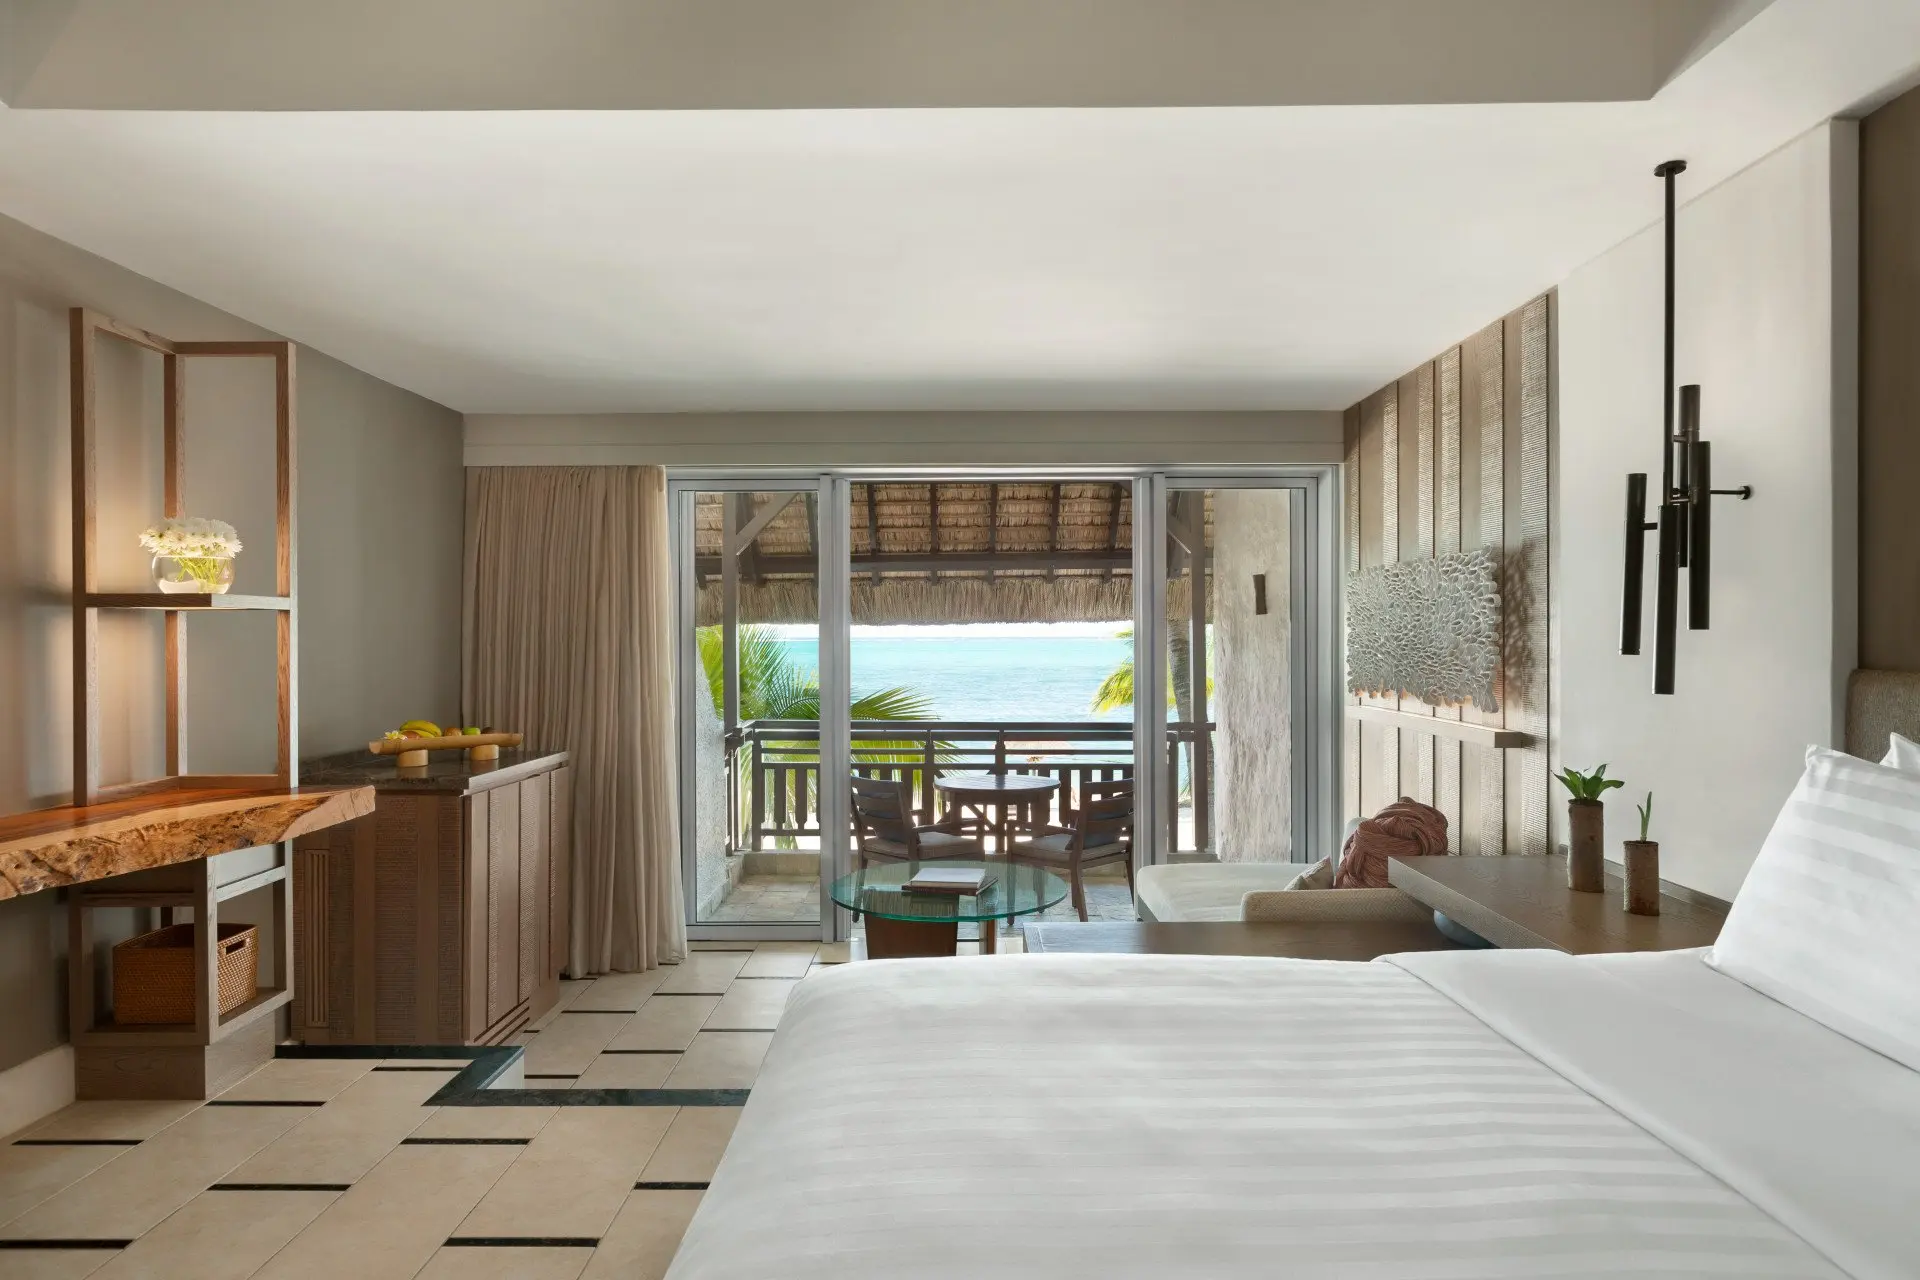 Mauritius-SLTR_Coral Deluxe Room Ocean View_King_Bedroom